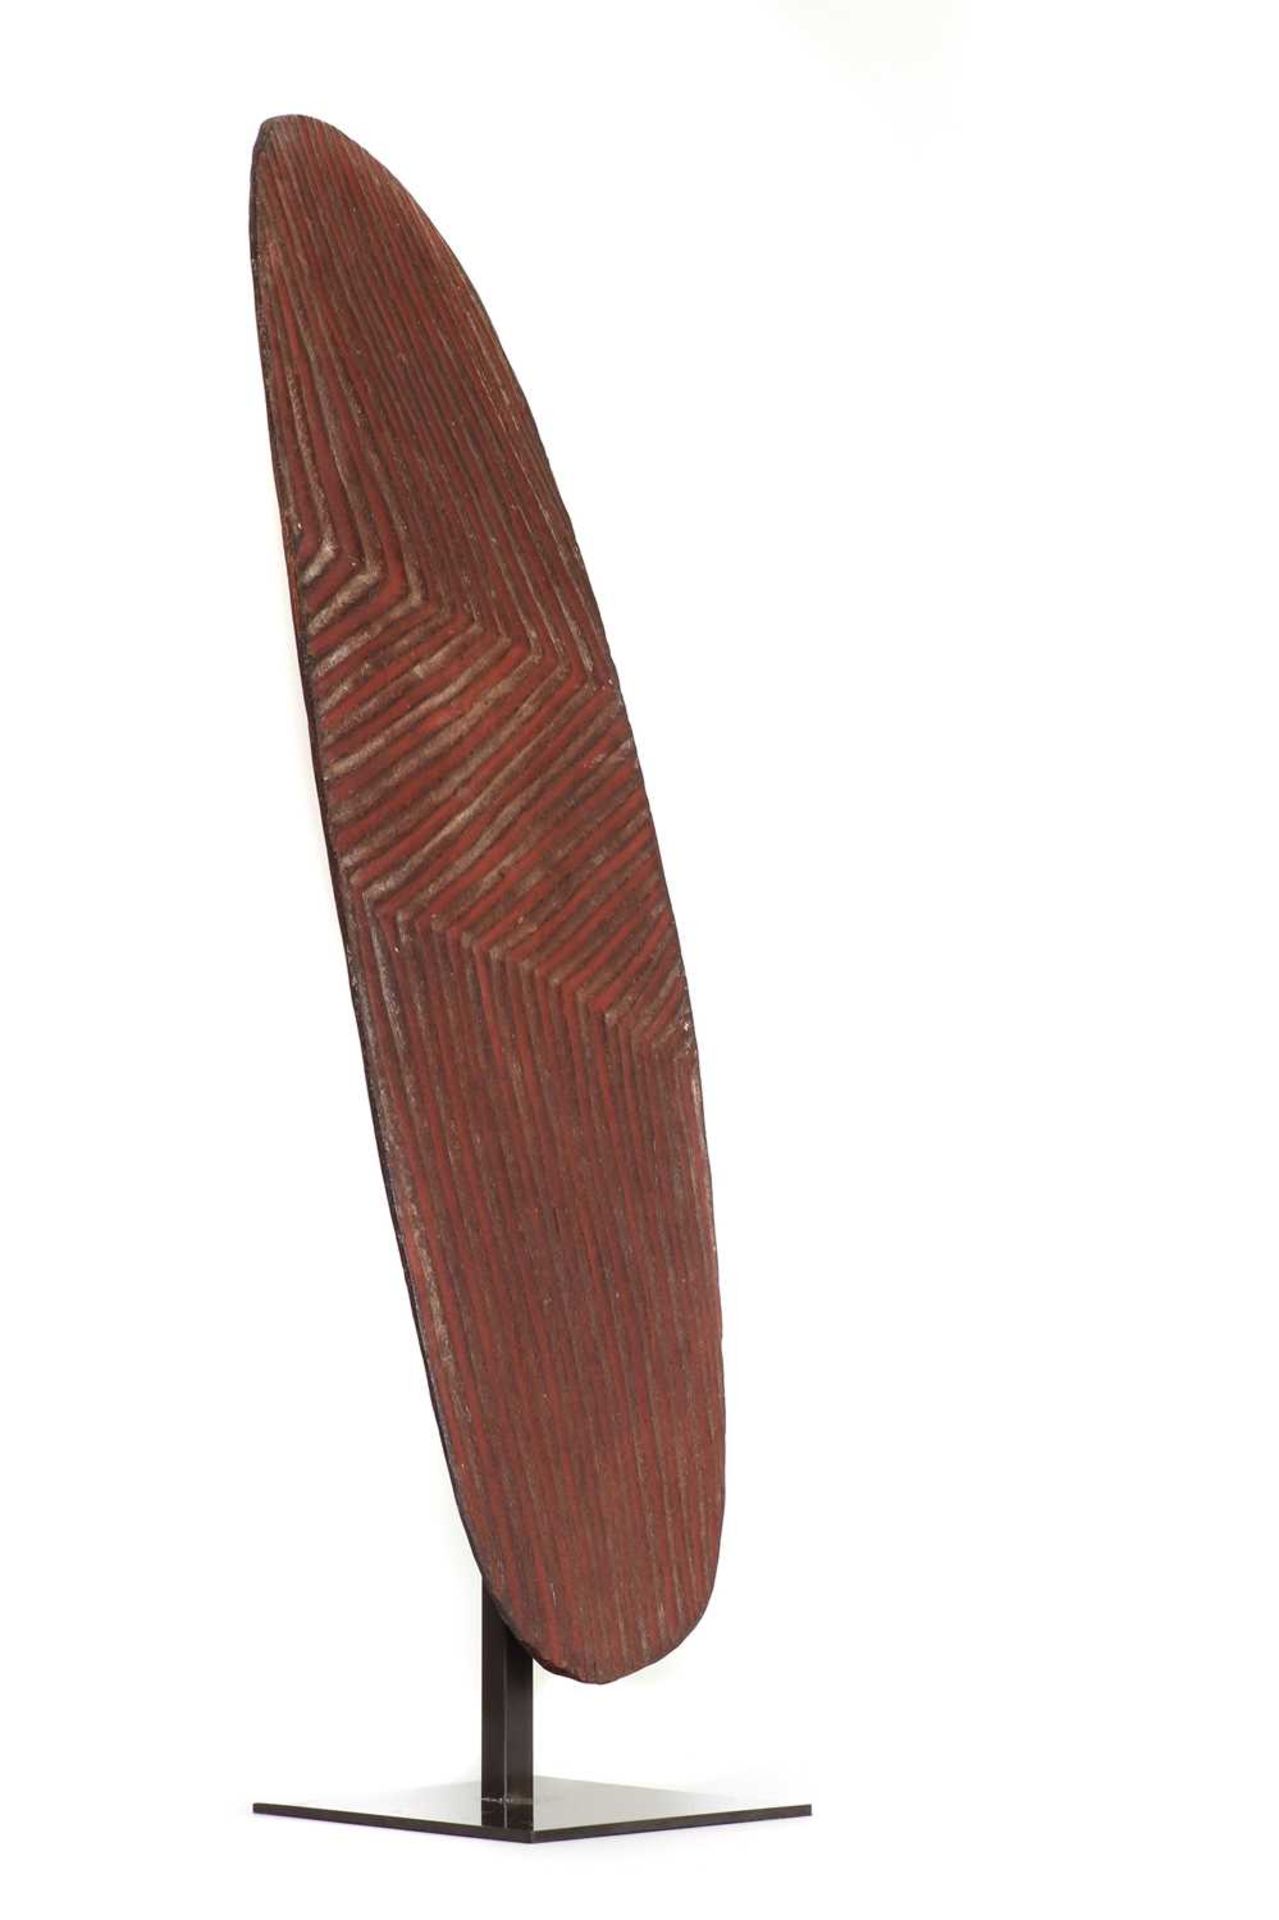 An Aboriginal stone-carved wooden shield or 'wunda',